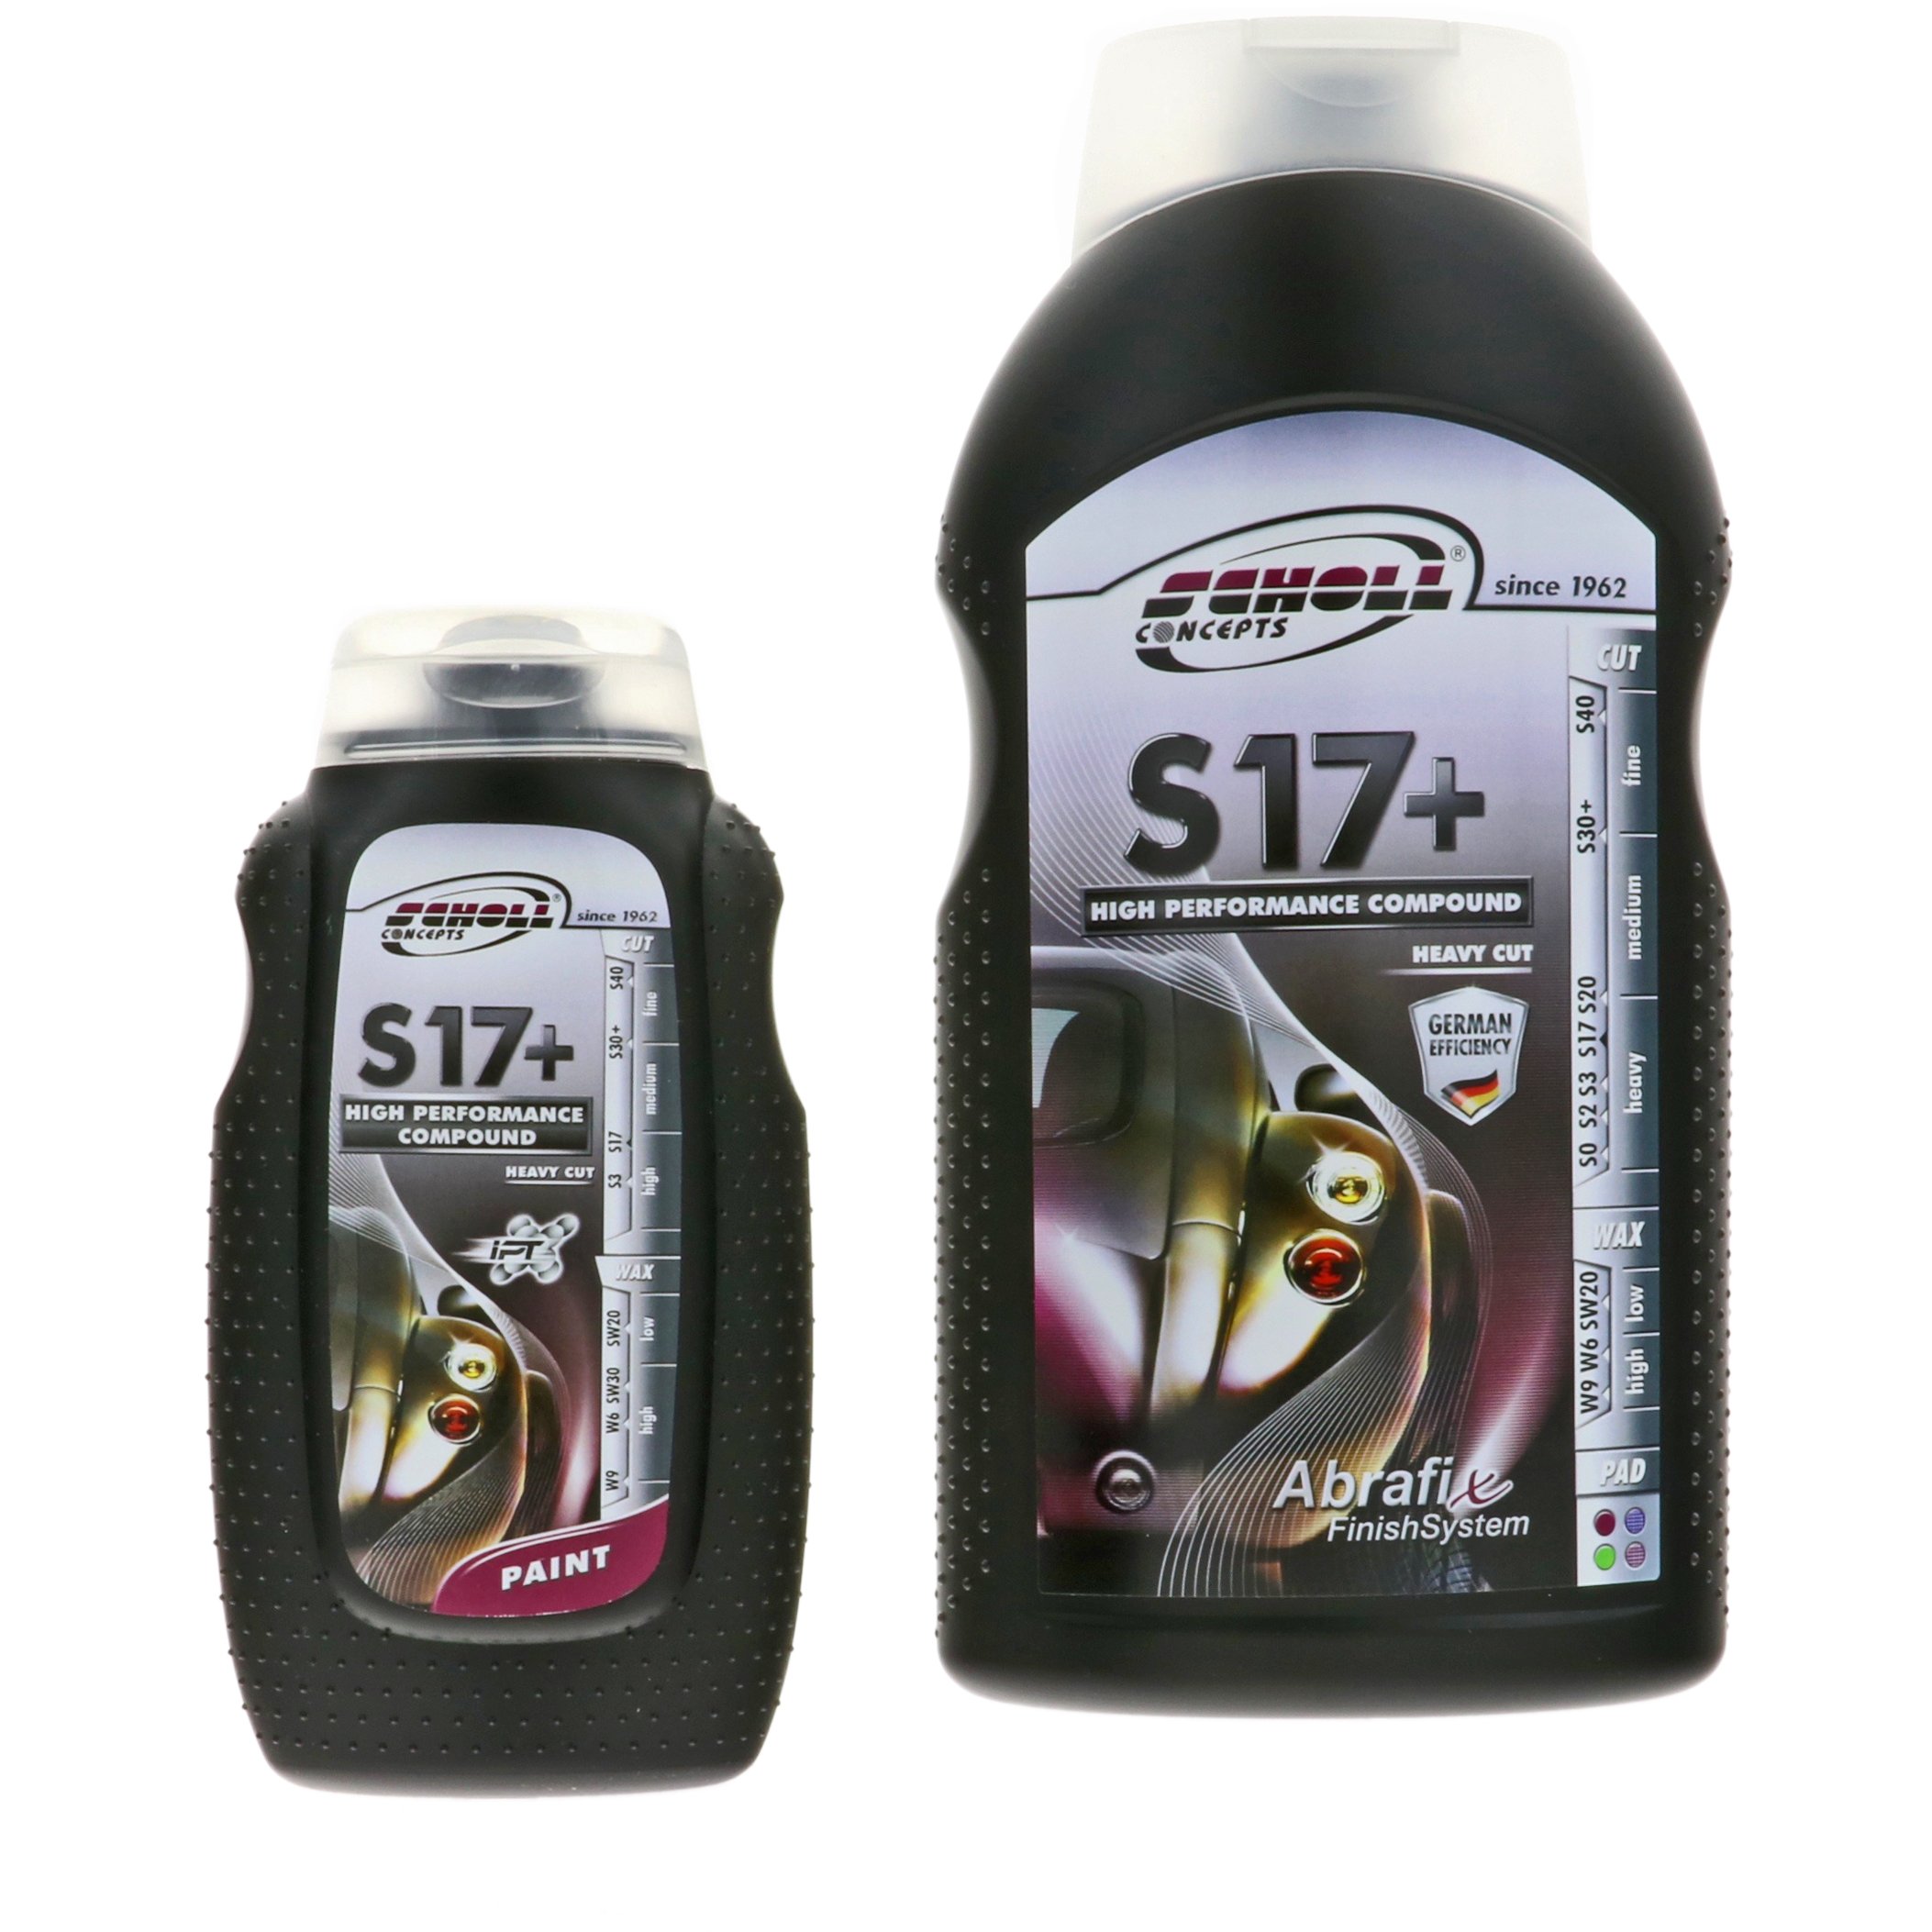 S17+ High Performance Compound